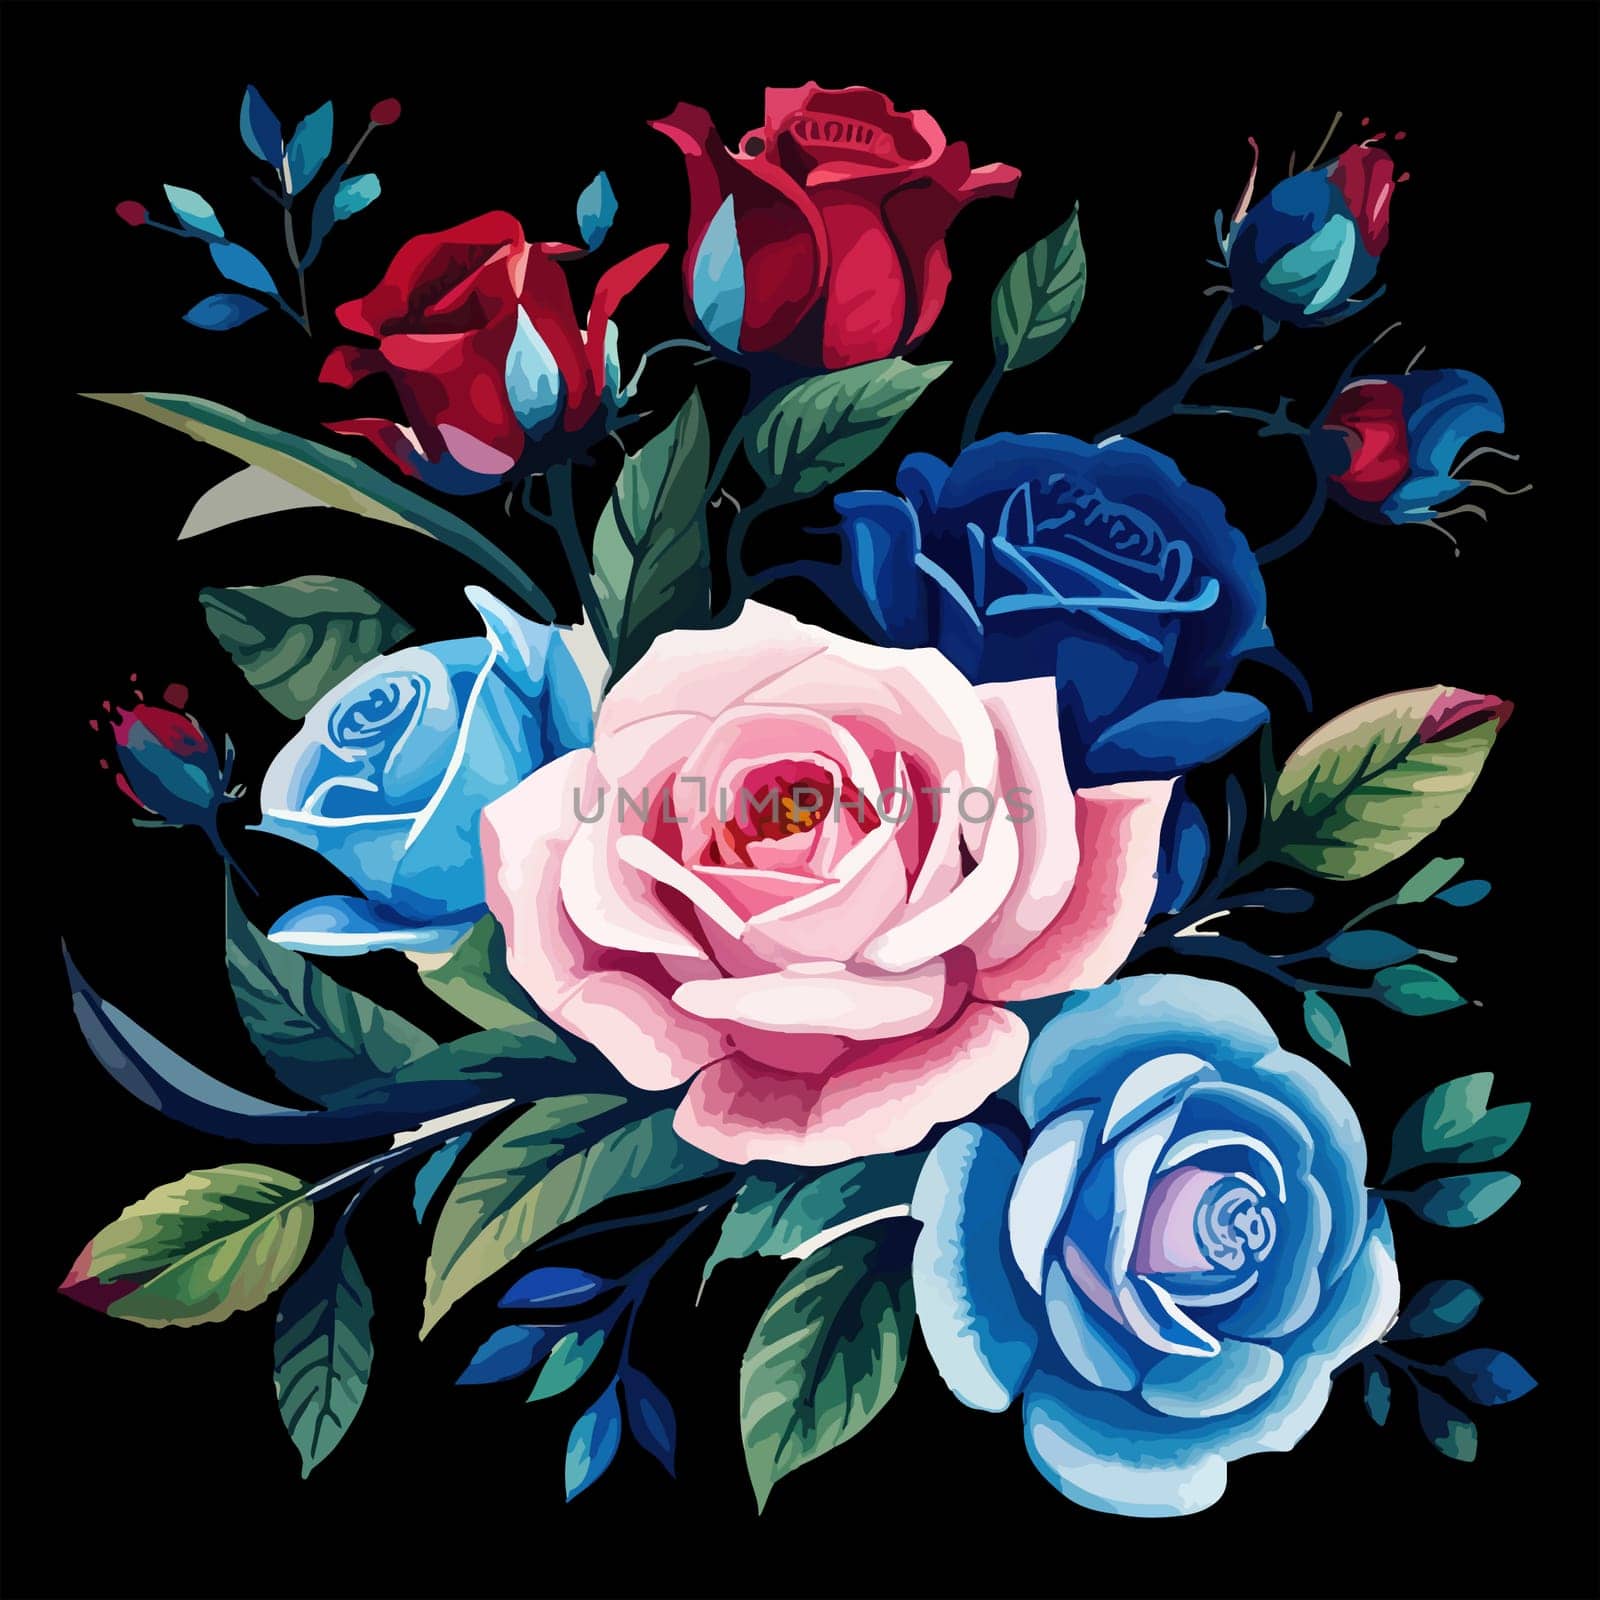 Floral bouquet, illustration. Red, white, and blue flowers roses by EkaterinaPereslavtseva